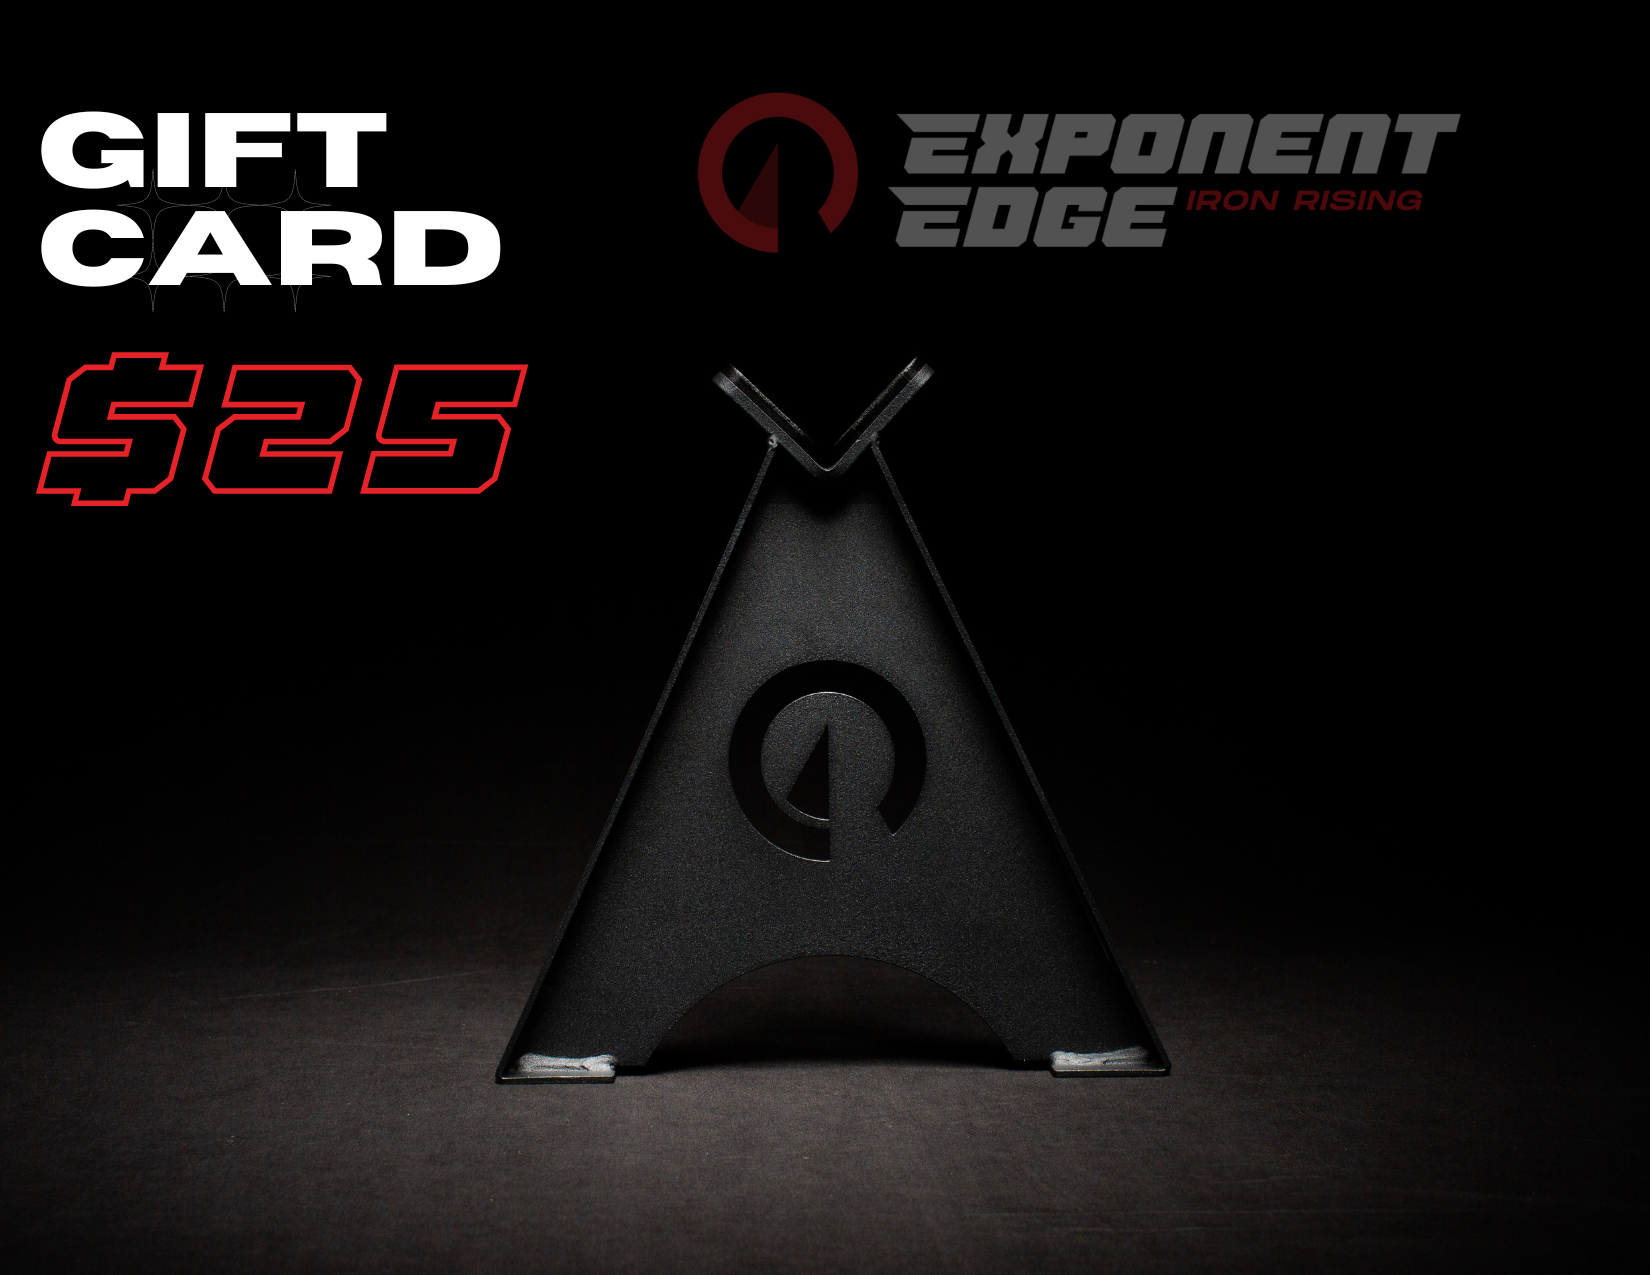 Exponent Edge Gift Card